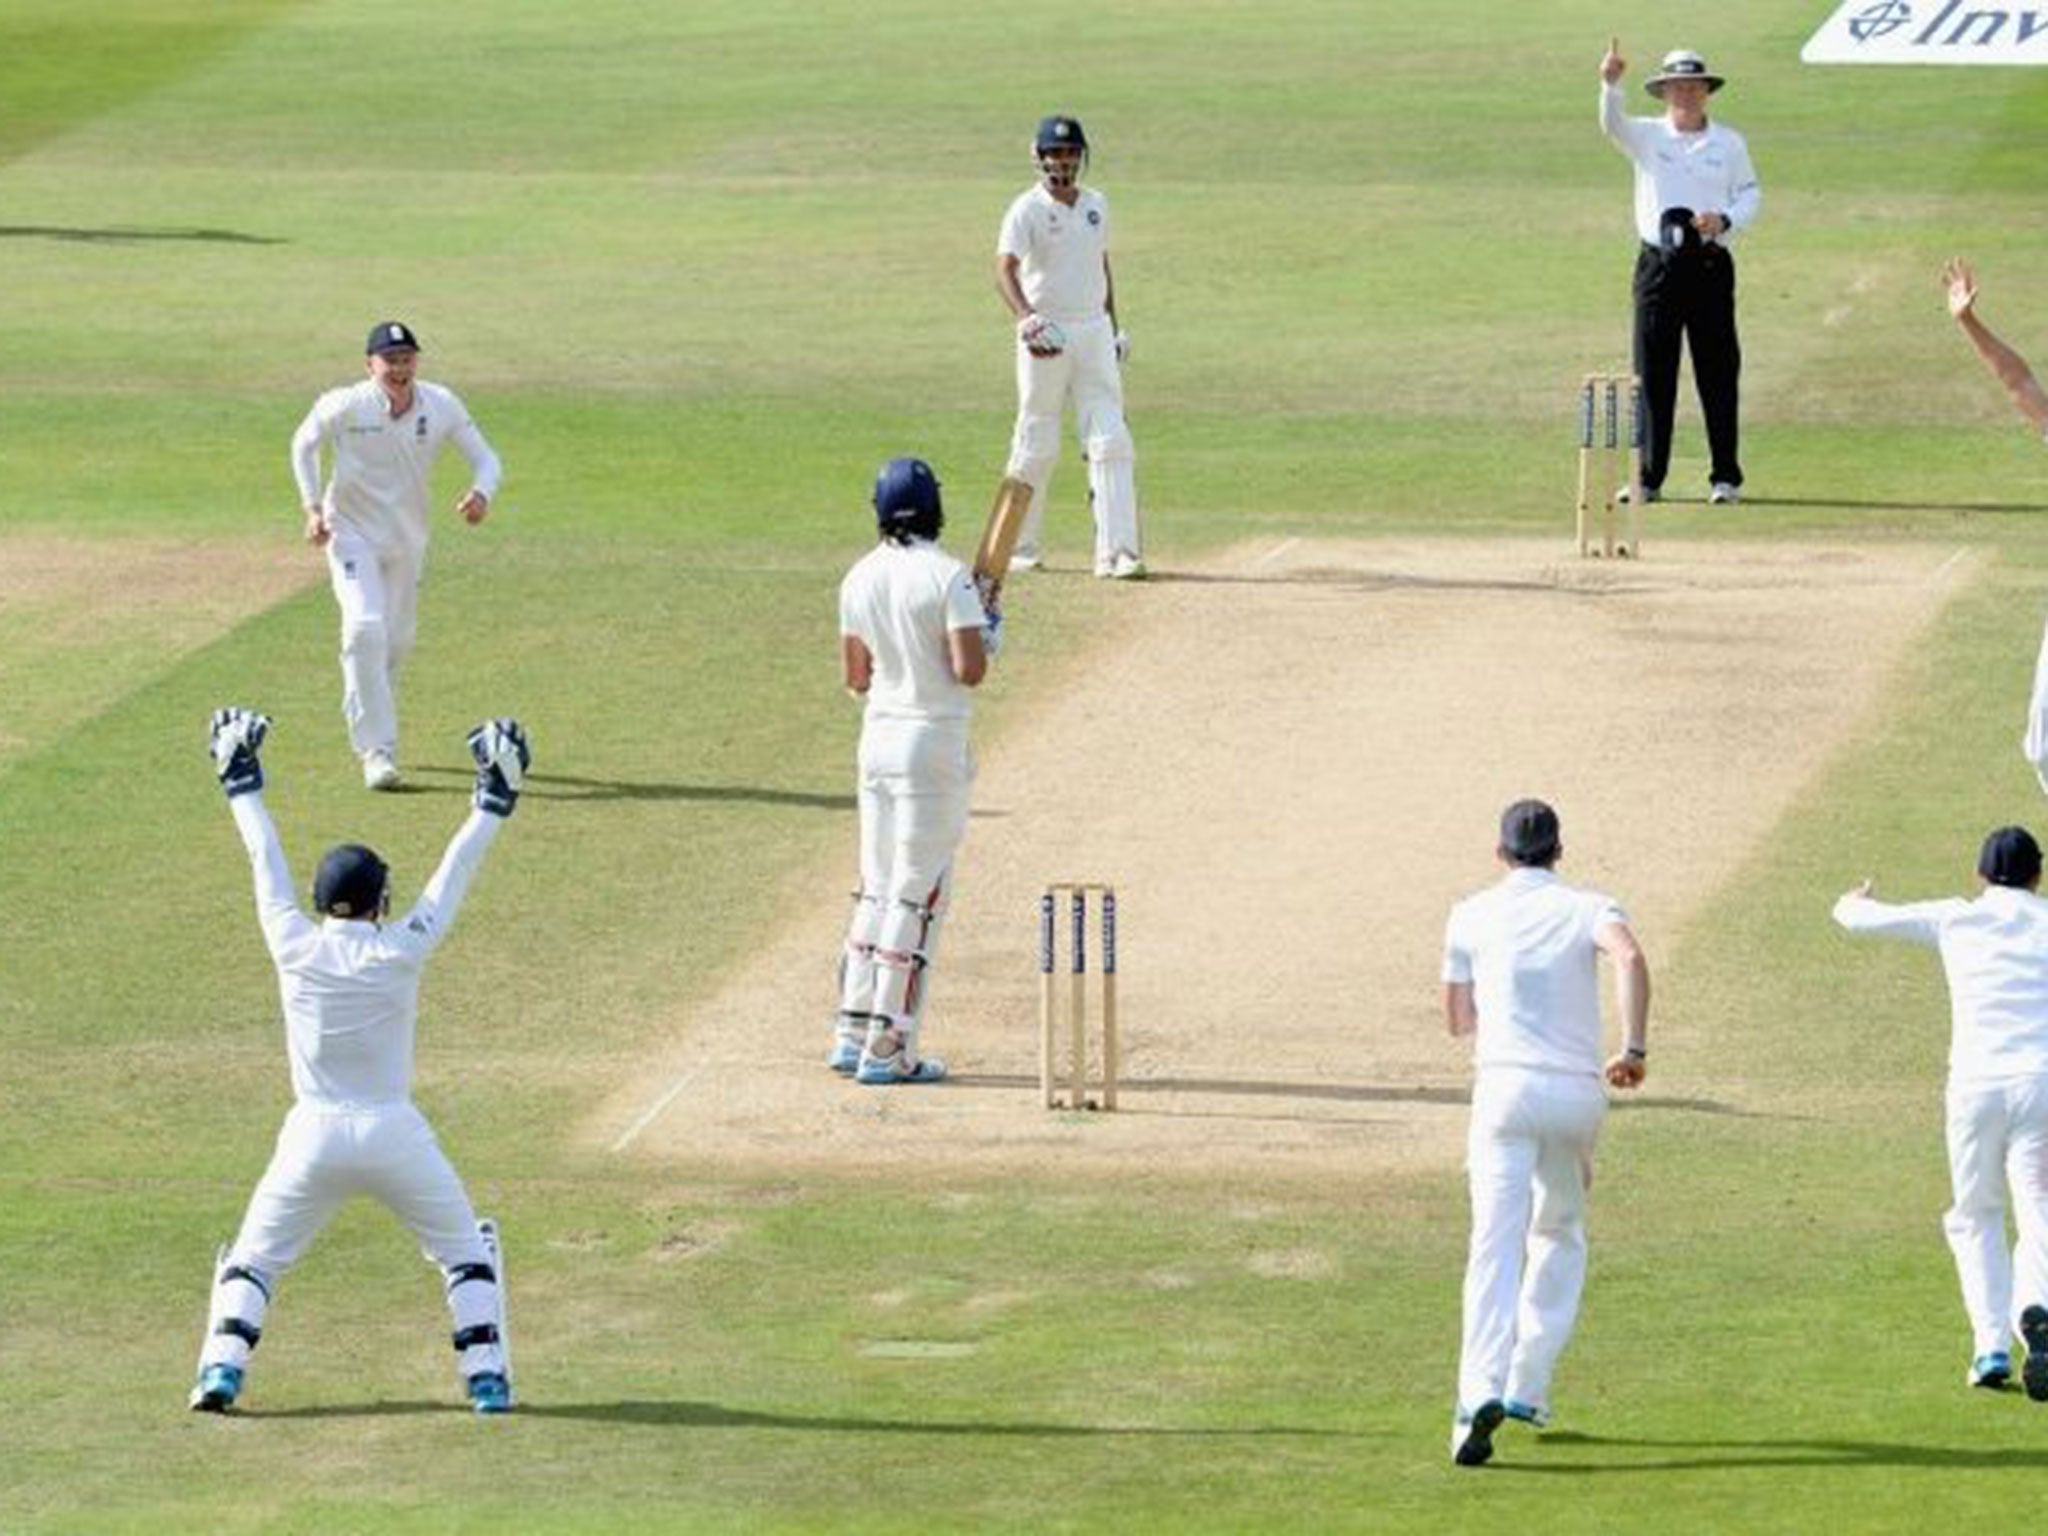 England celebrate the dismissal of Ishant Sharma, and Alastair Cook’s first Test wicket, on a largely meaningless day five